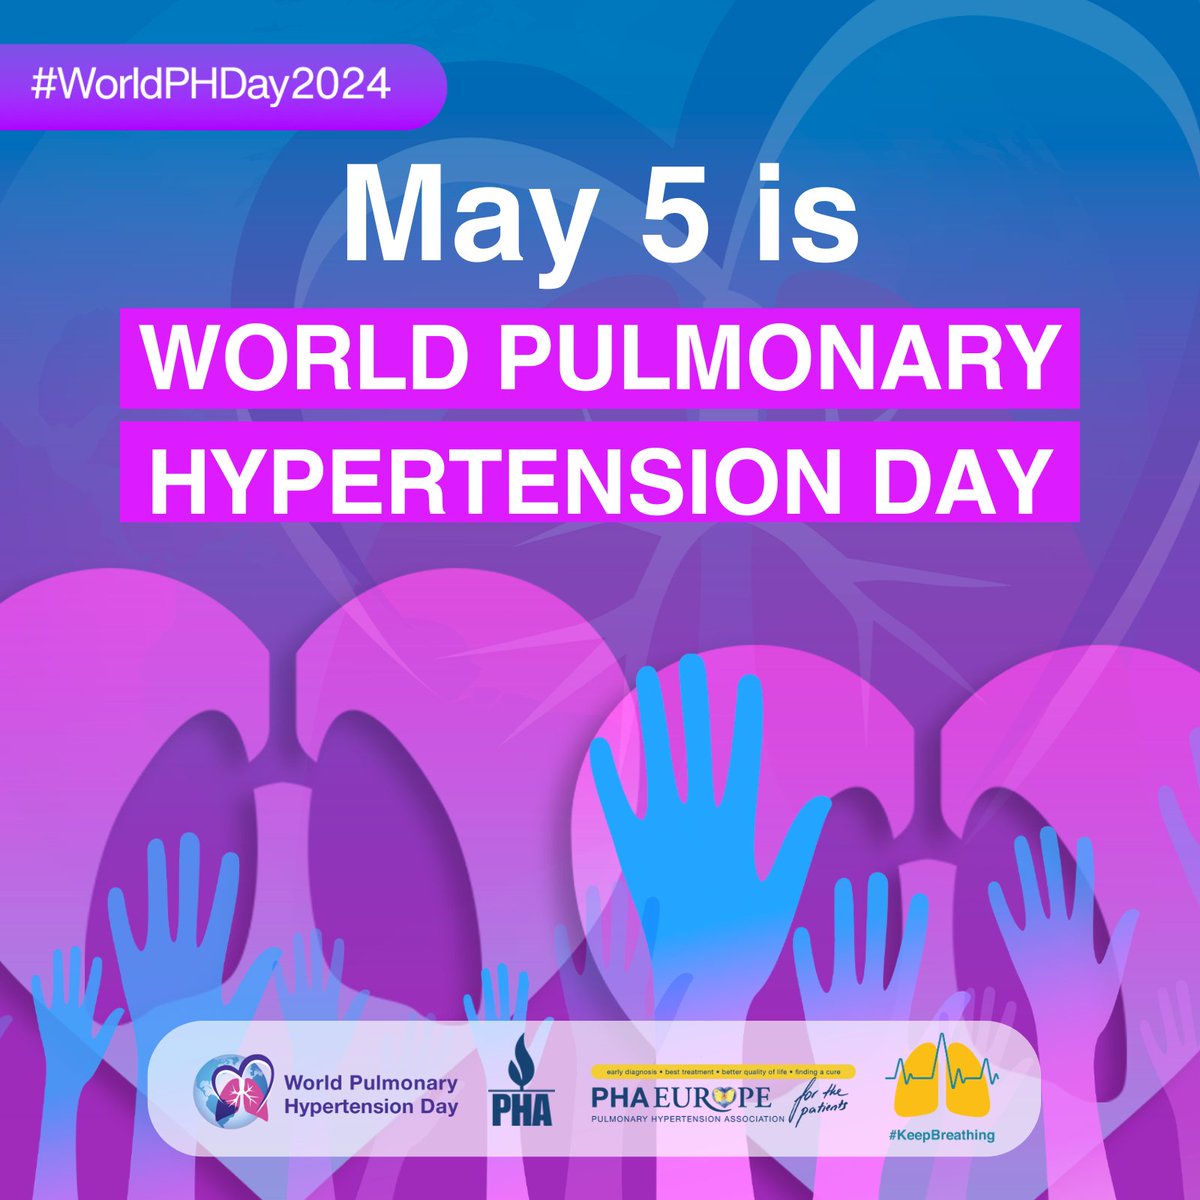 #WorldPHDay2024 is coming up on May 5! 🌍1% of people worldwide are impacted by PH We stand united with our pulmonary hypertension community for early diagnosis and access to care for PH #patients to #KeepBreathing in Europe and globally. Support us: worldphday.org